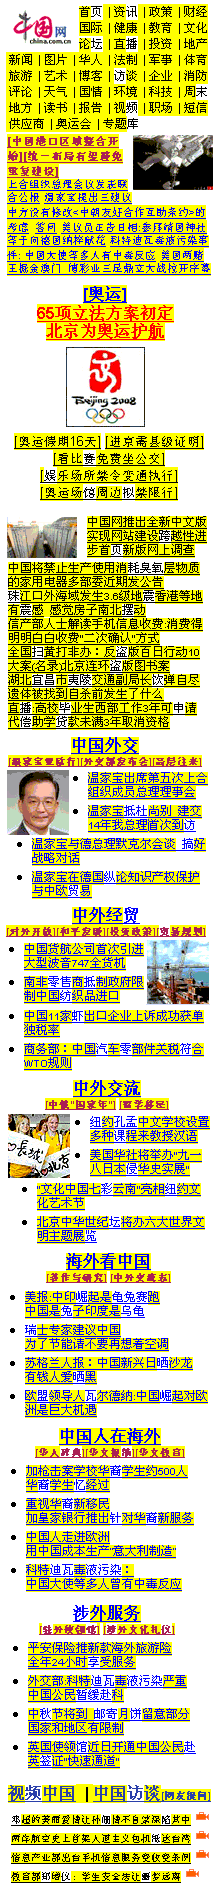 Snapshot of the home \npage of www.china.com.cn. \nThe Chinese symbols that \nyou'll learn in this course, \nthose among the 1000 most \nfrequently used, are \nhighlighted in yellow.